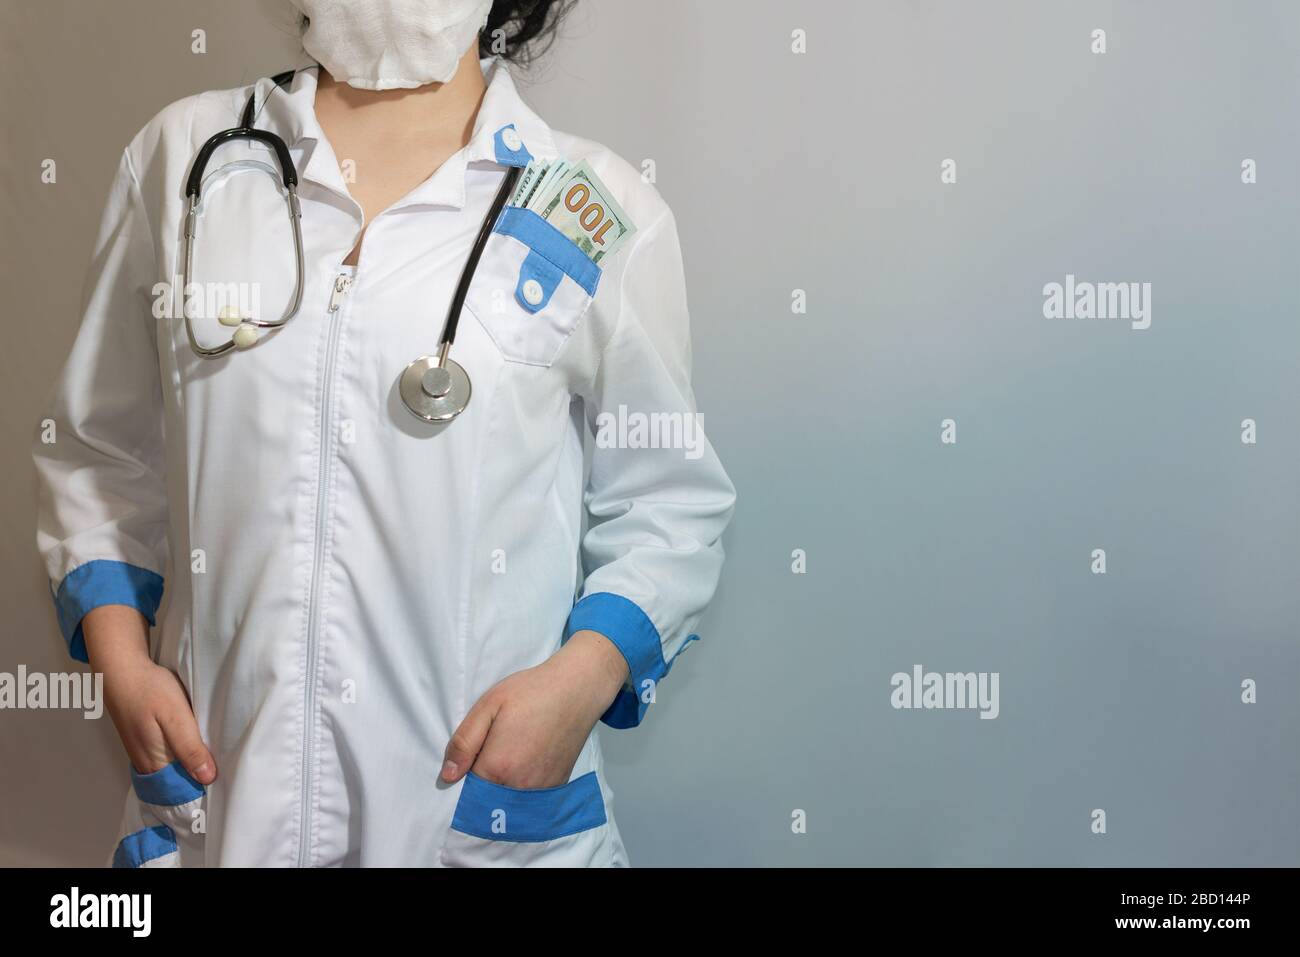 Bribe. Hundred dollar bill in the pocket of a Doctor or paramedic. Corruption in medicine, pharmaceuticals. The concept of paid medicine. Stock Photo